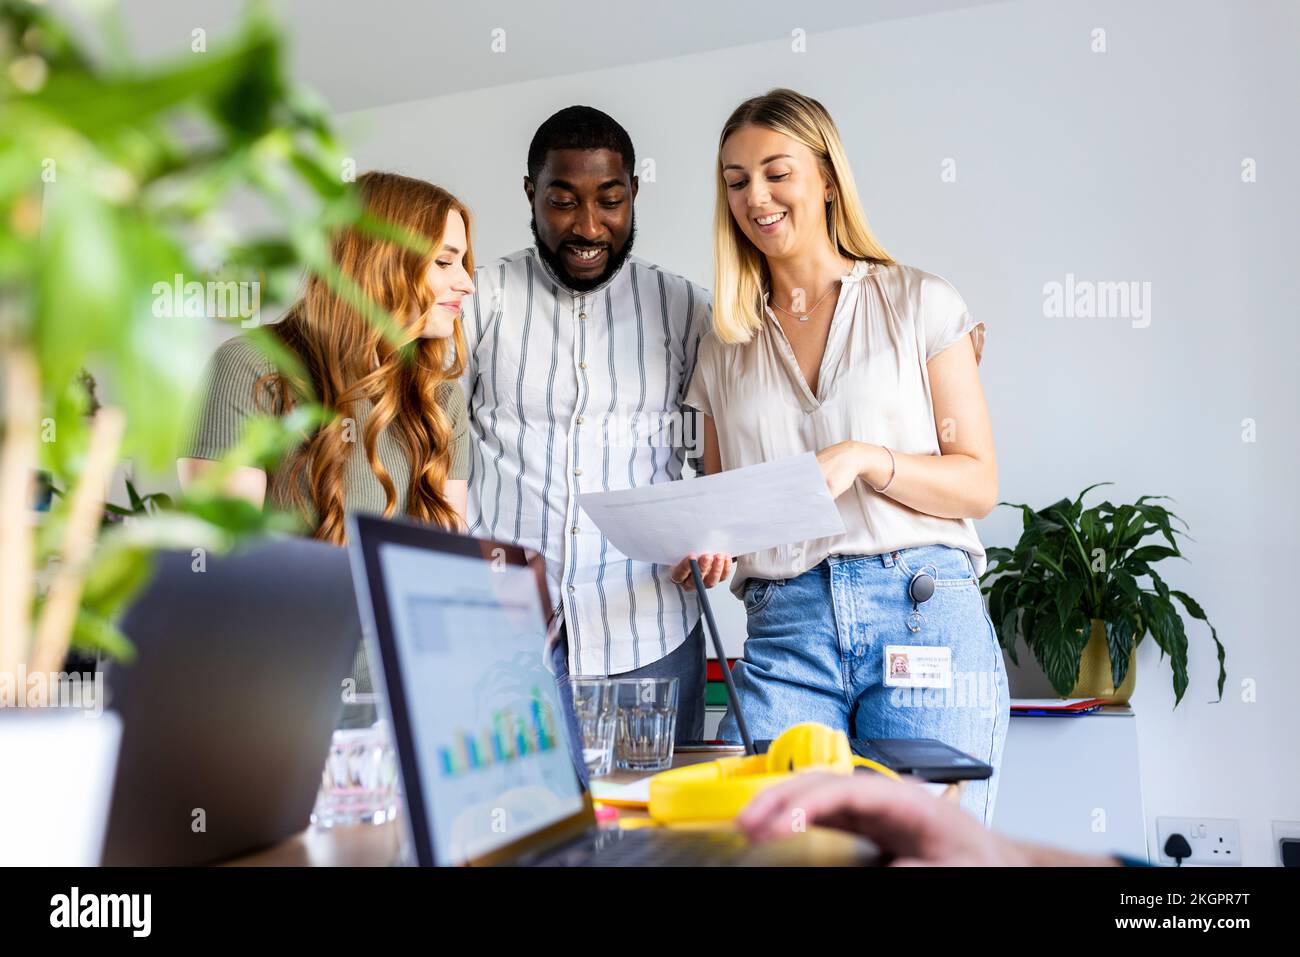 Smiling business colleagues discussing over paper document in office meeting Stock Photo